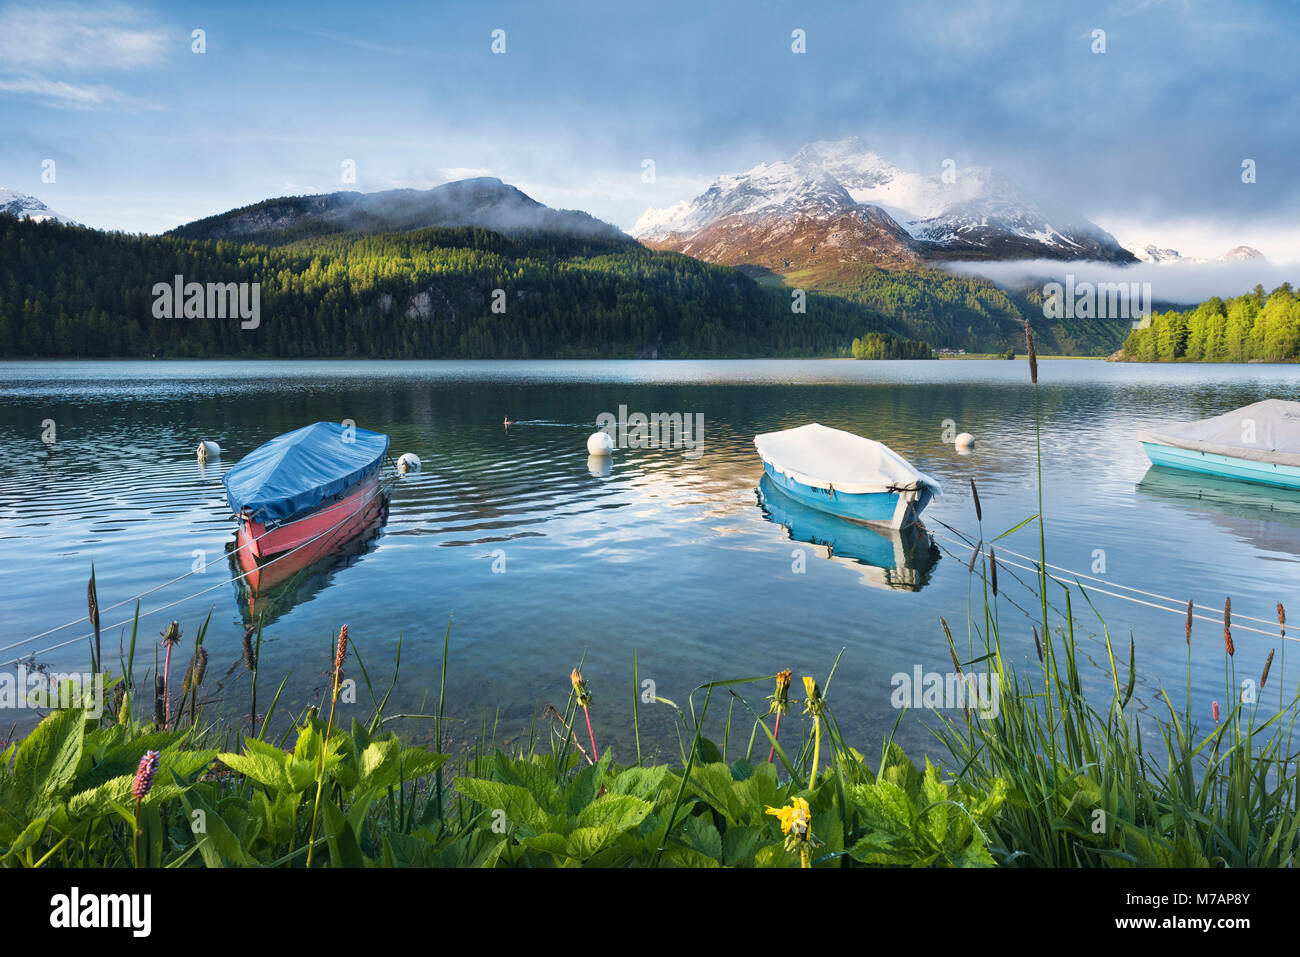 Idyllic scene on Lake Sils in the Engadin near St. Moritz, Swiss Alps, boats, blue water with reflection in the early morning light Stock Photo